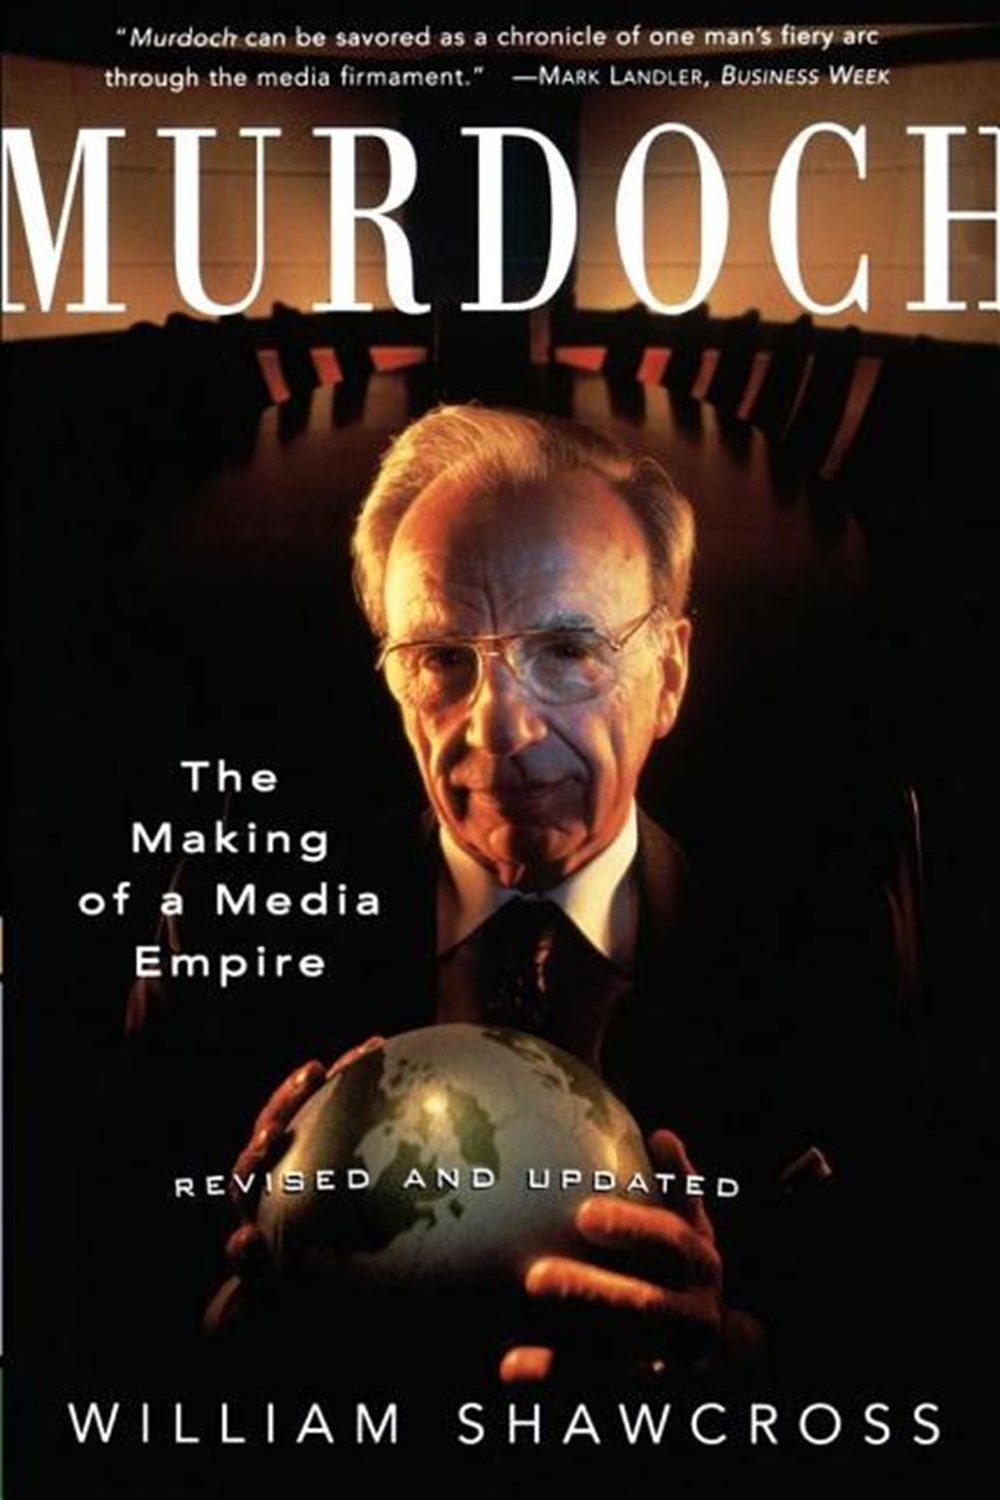 Murdoch: Revised and Updated (Rev & Updated)